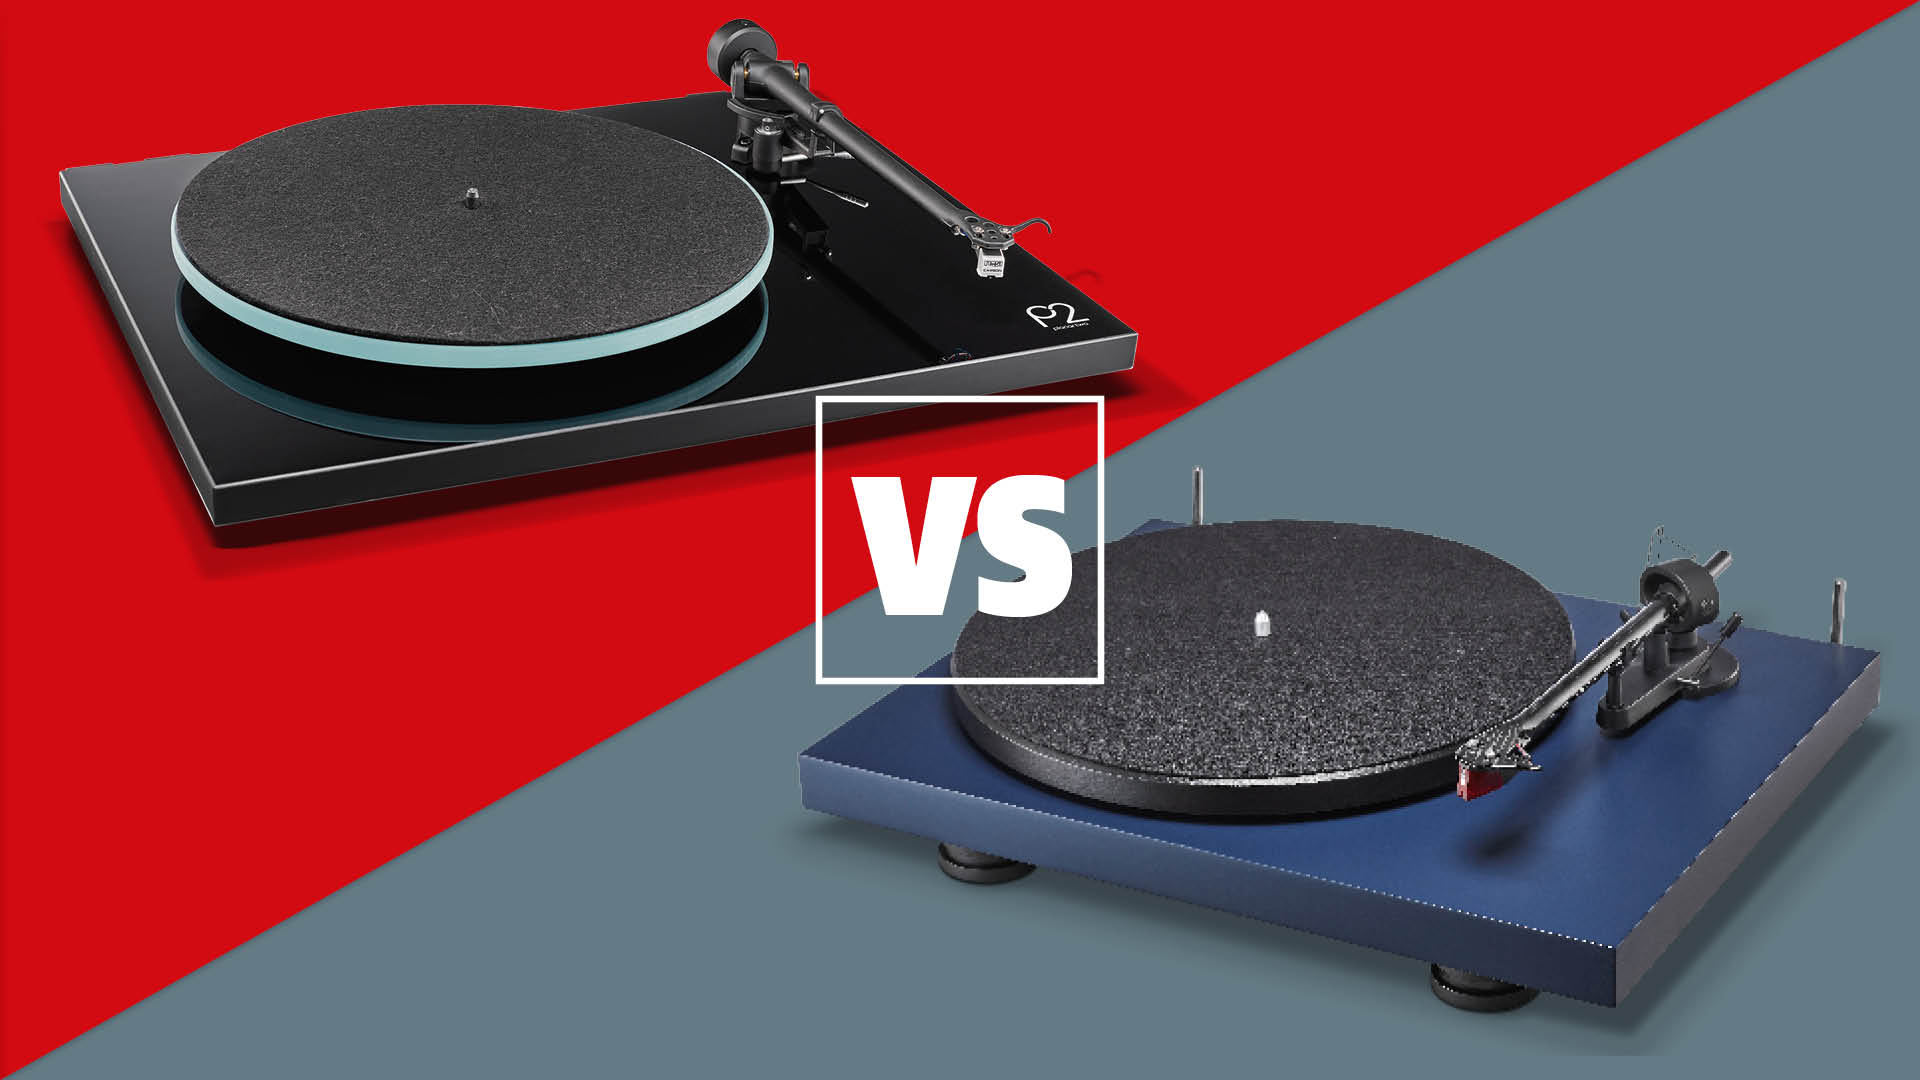 Pro-Ject Debut Carbon Evo turntable with Ortofon 2M Red price -   - Hi-Fi Home Cinema Audio-Video